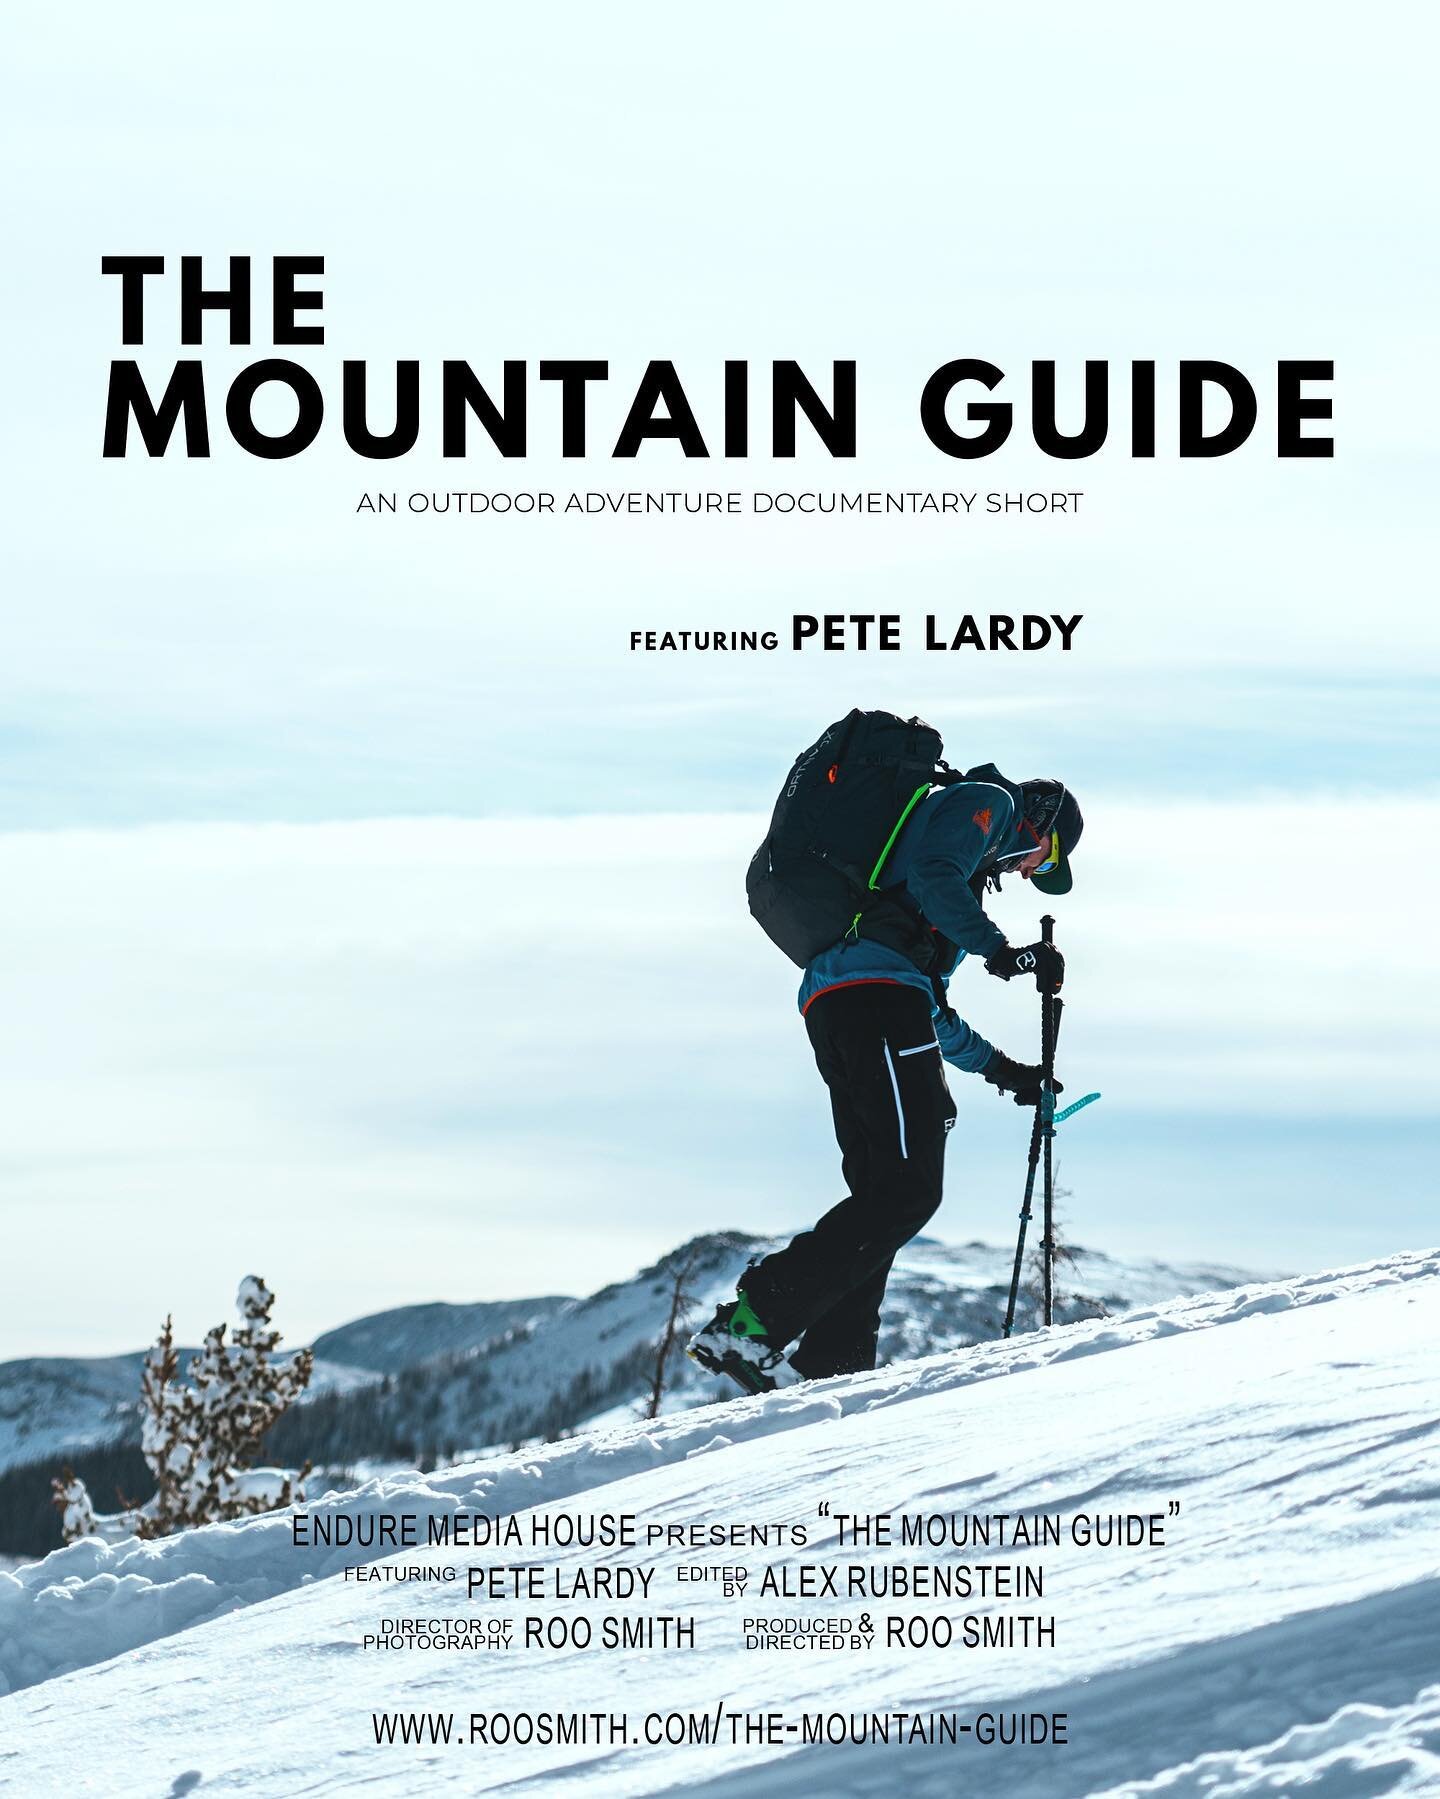 WATCH &ldquo;THE MOUNTAIN GUIDE&rdquo; ONLINE NOW!

That&rsquo;s right, it&rsquo;s finally out online for you all to see (link in bio or on my website under &ldquo;The Mountain Guide&rdquo; tab)

&ldquo;The Mountain Guide&rdquo; is a story about Pete